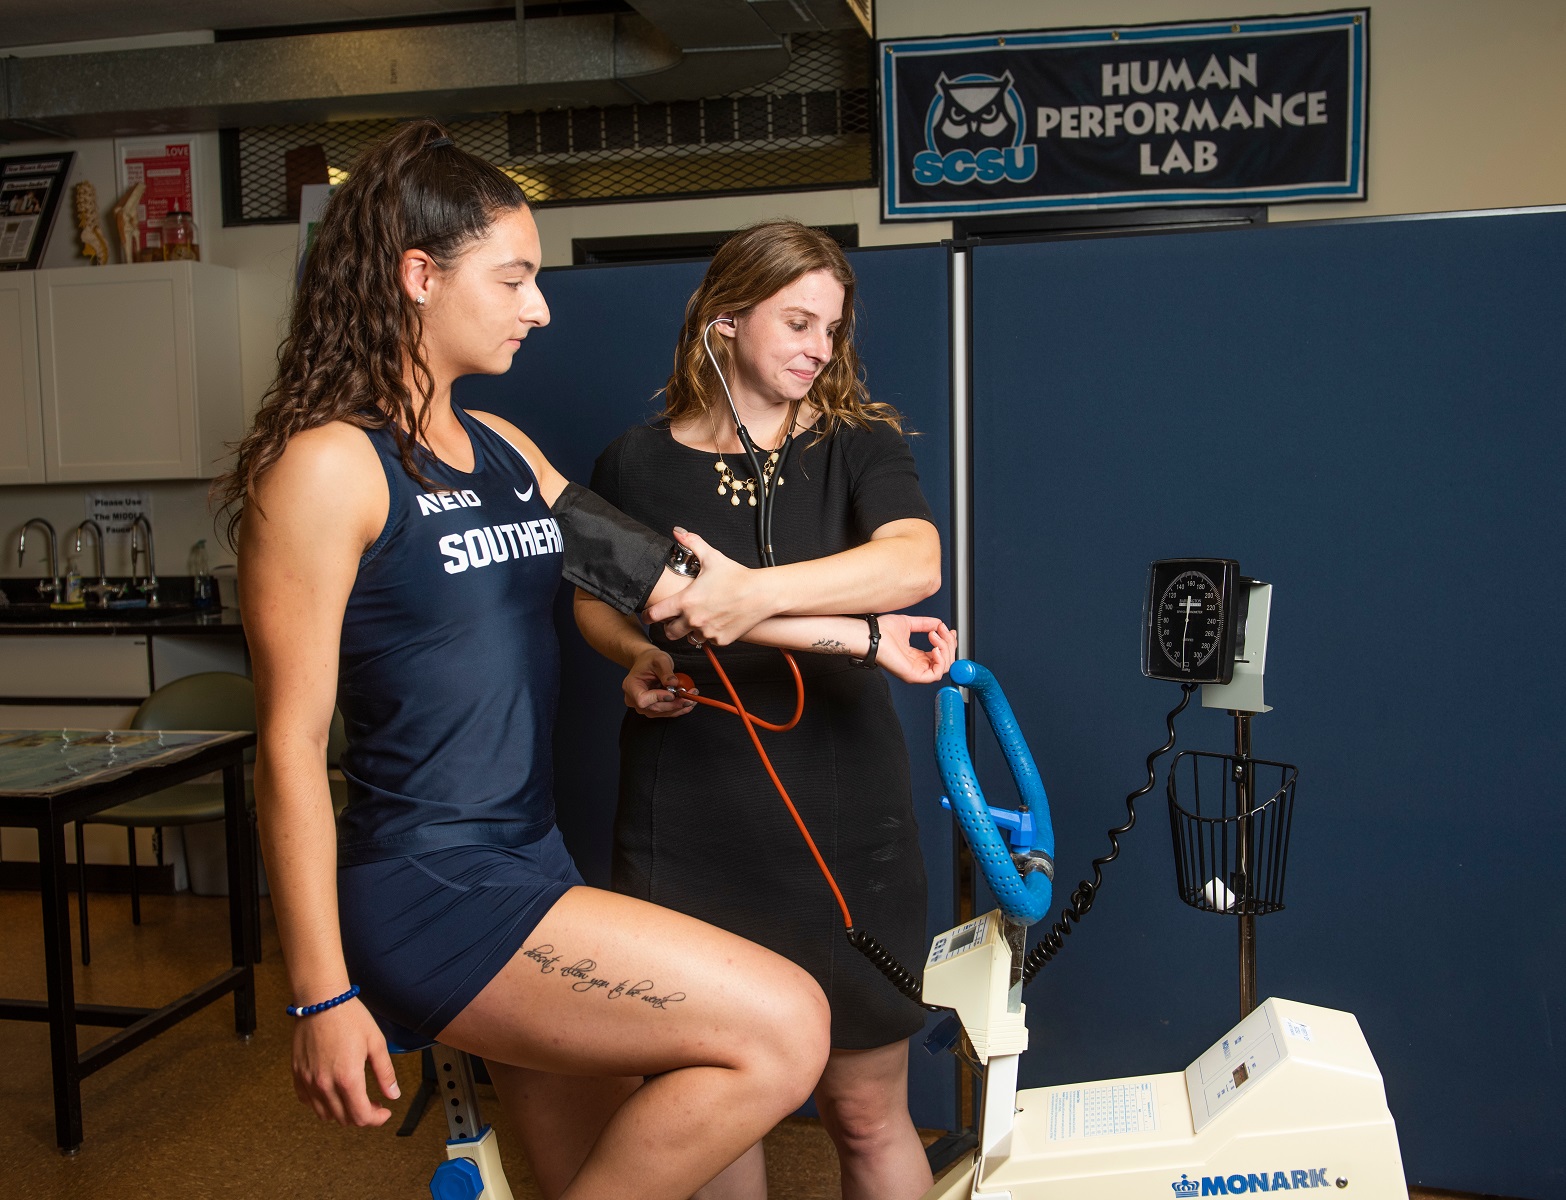 A YMCA cycle ergometer test being performed